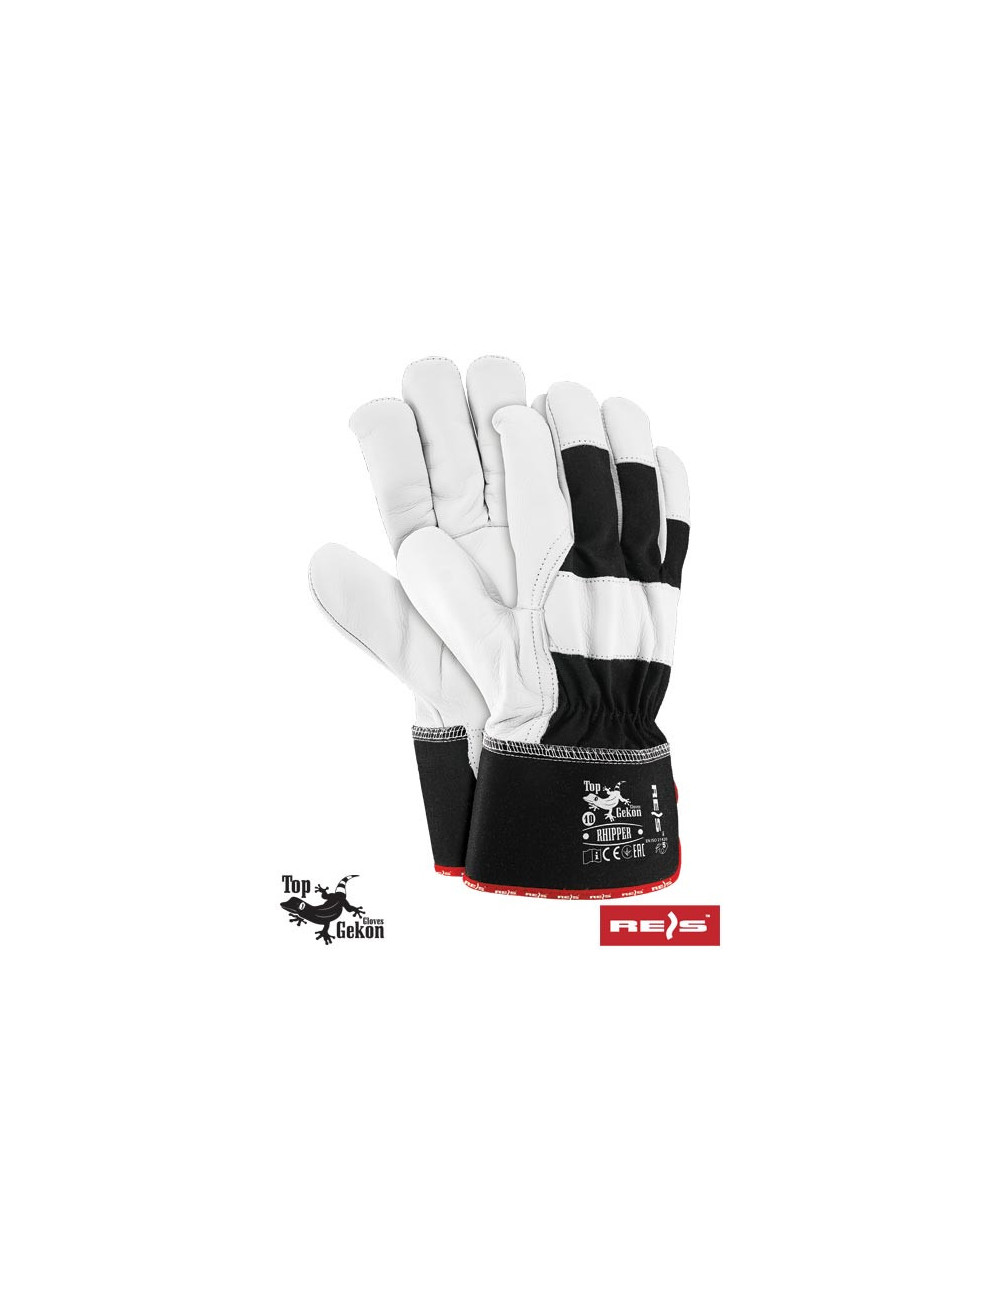 Protective gloves rhipper bw black and white Reis